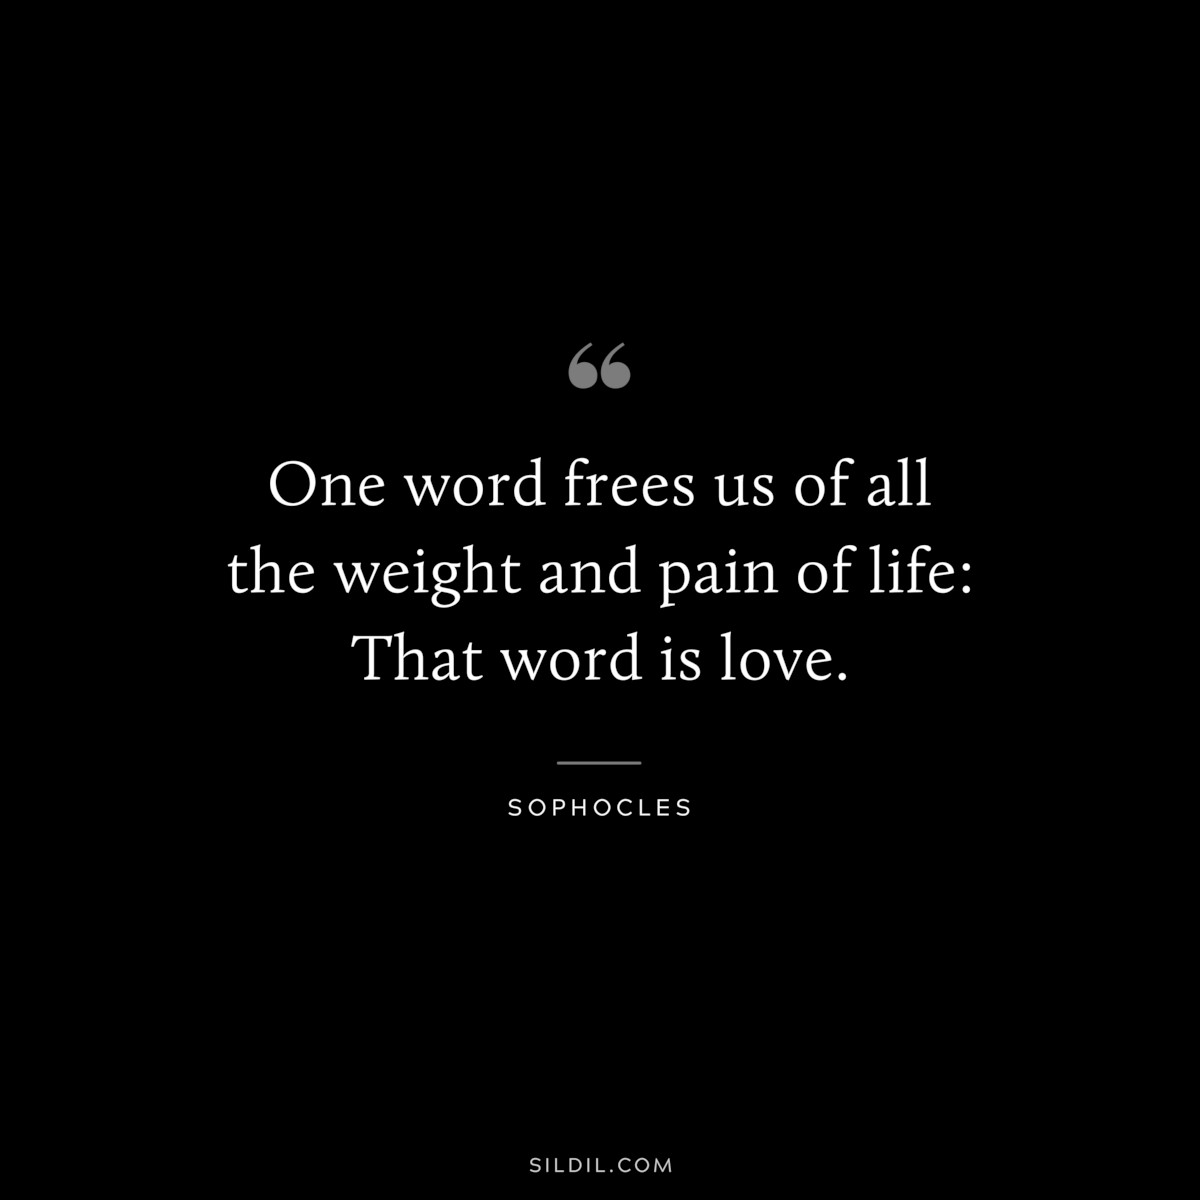 One word frees us of all the weight and pain of life: That word is love. ― Sophocles